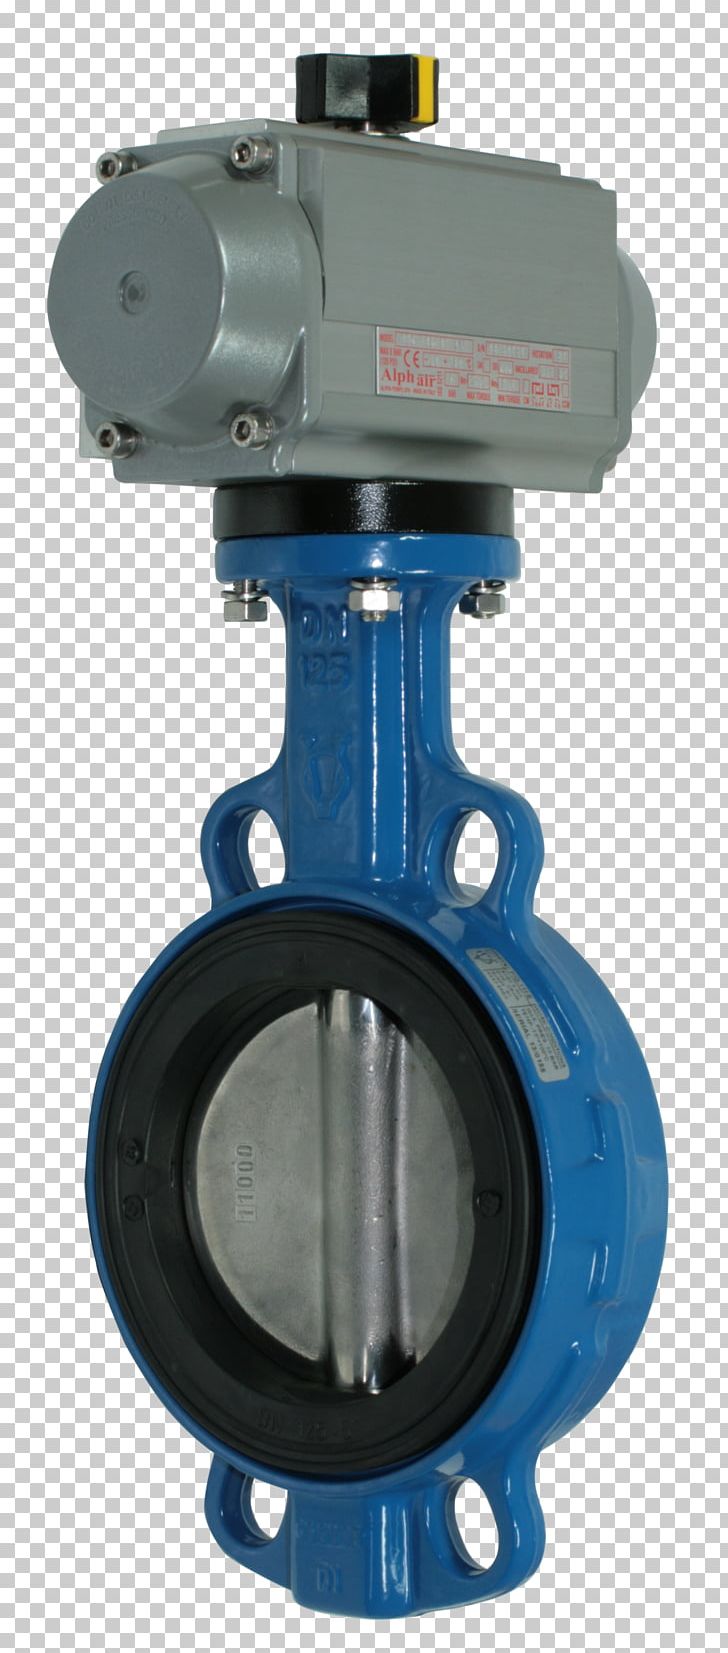 Butterfly Valve Flange Ball Valve Electricity PNG, Clipart, Actuator, Angle, Ball Valve, Butterfly Valve, Cylinder Free PNG Download